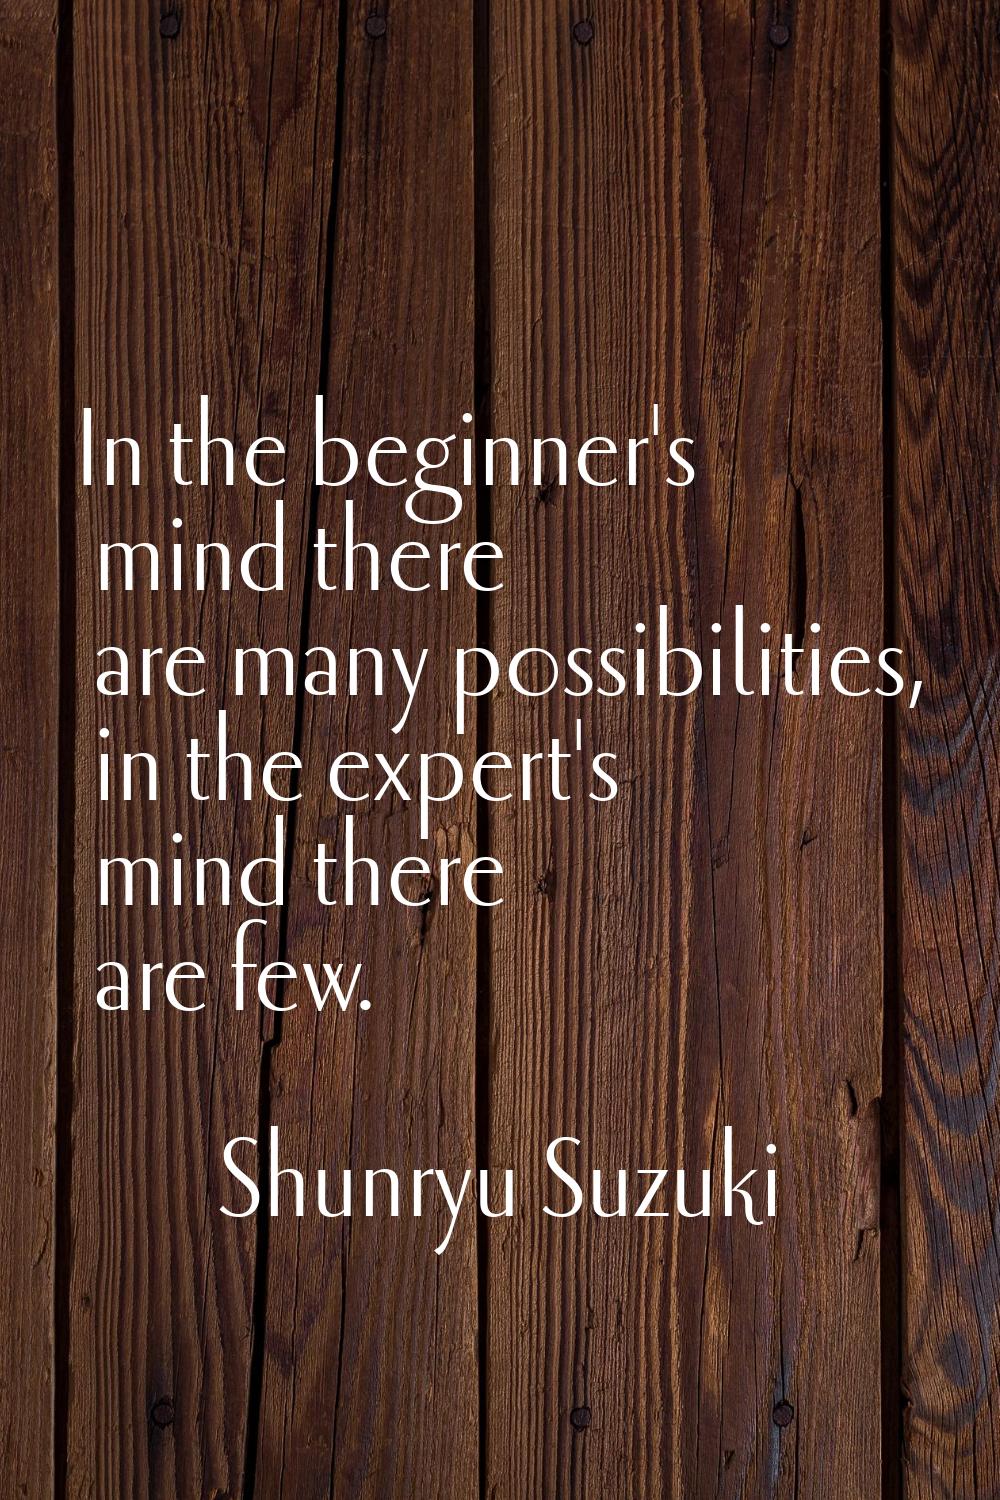 In the beginner's mind there are many possibilities, in the expert's mind there are few.